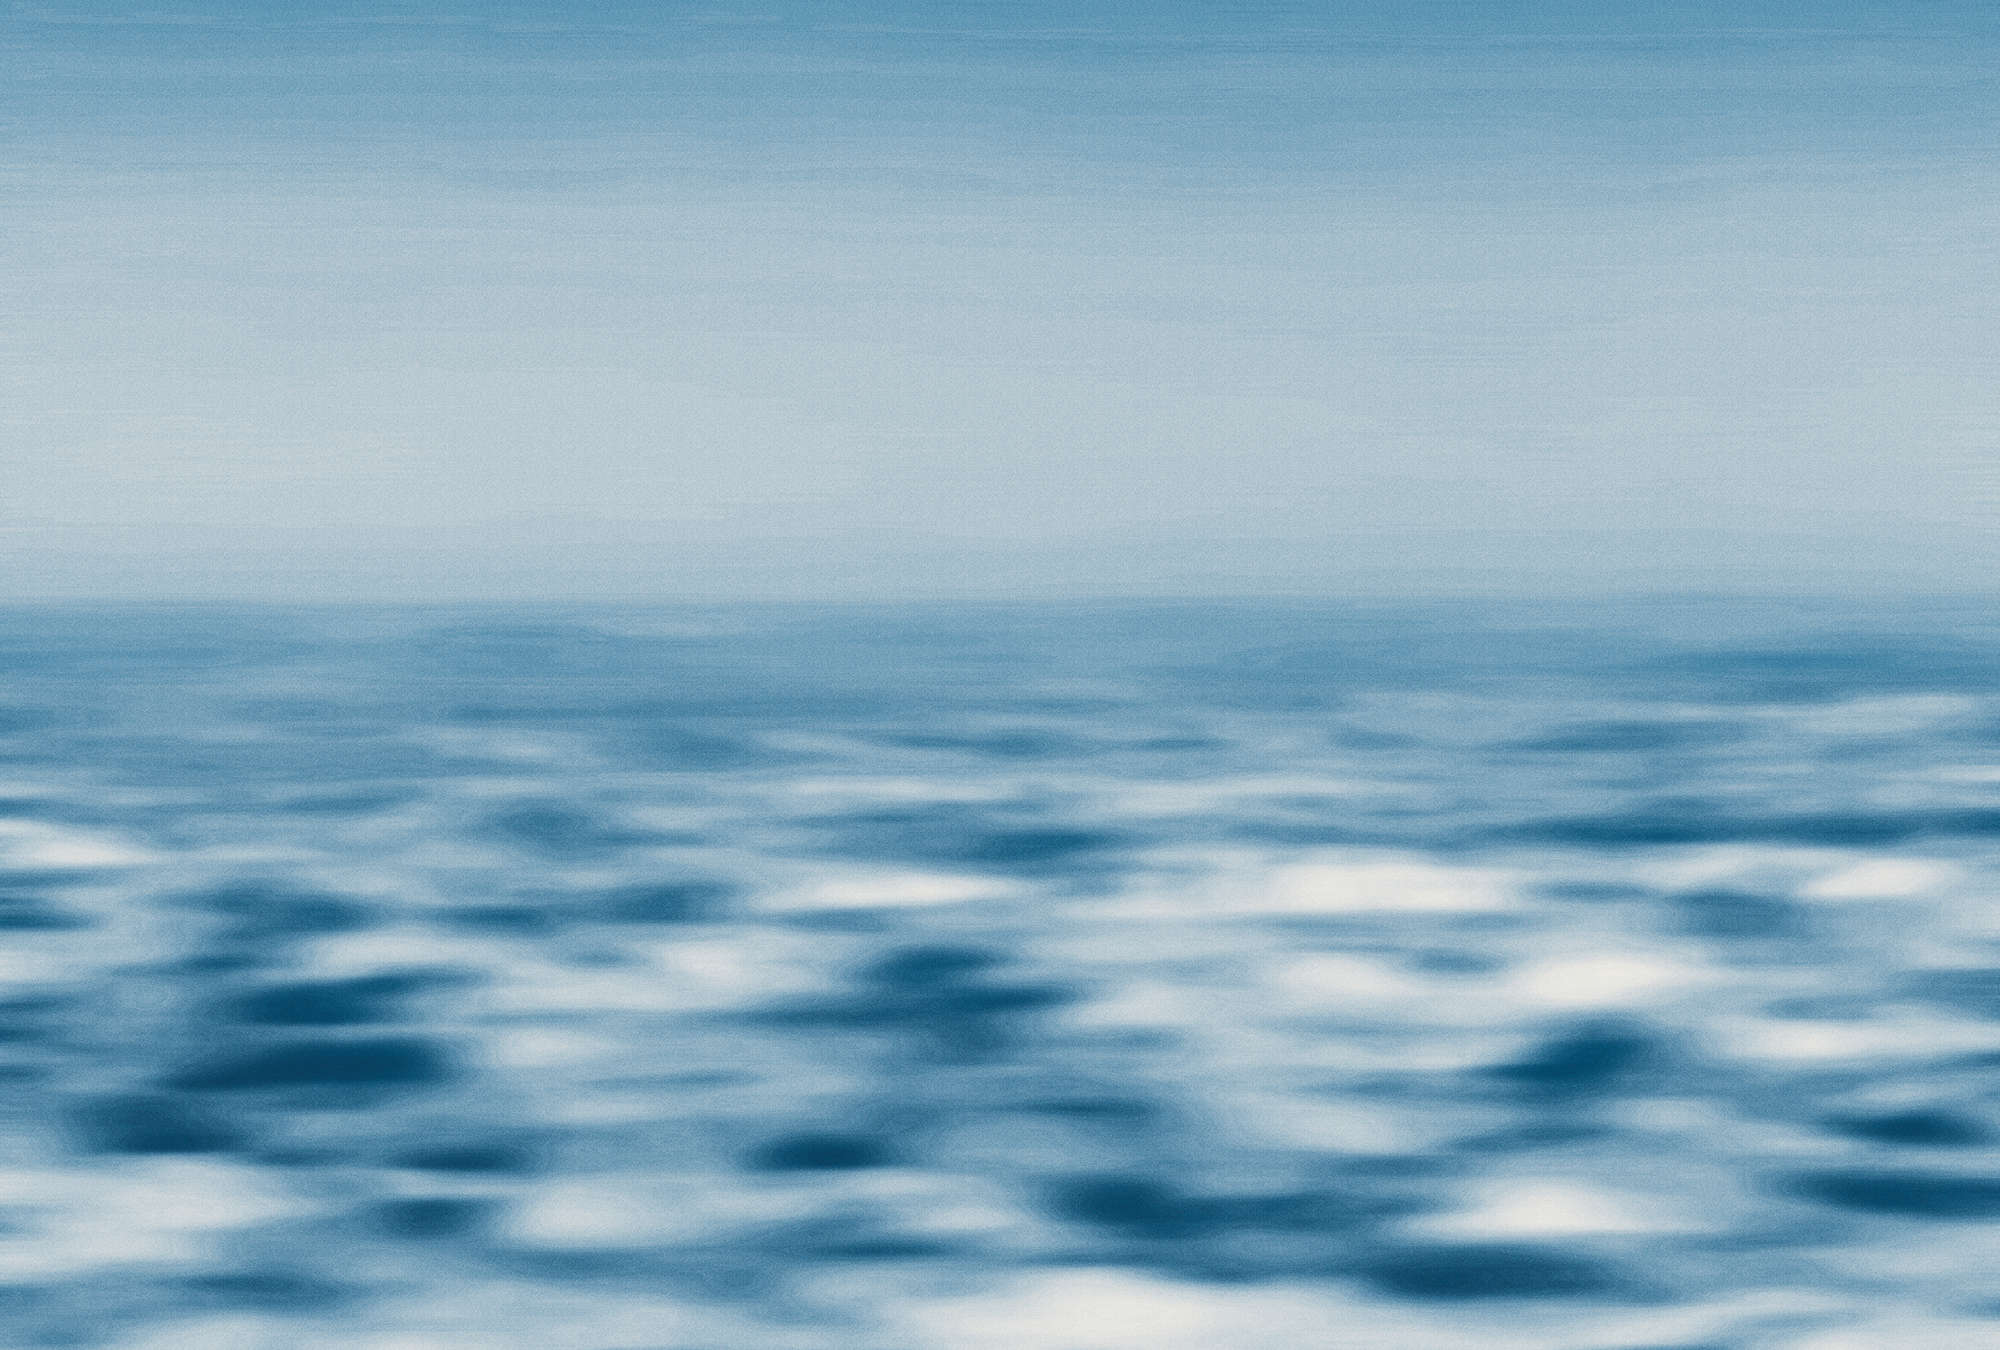             Photo wallpaper abstract sea view, waves & sky - blue, white
        